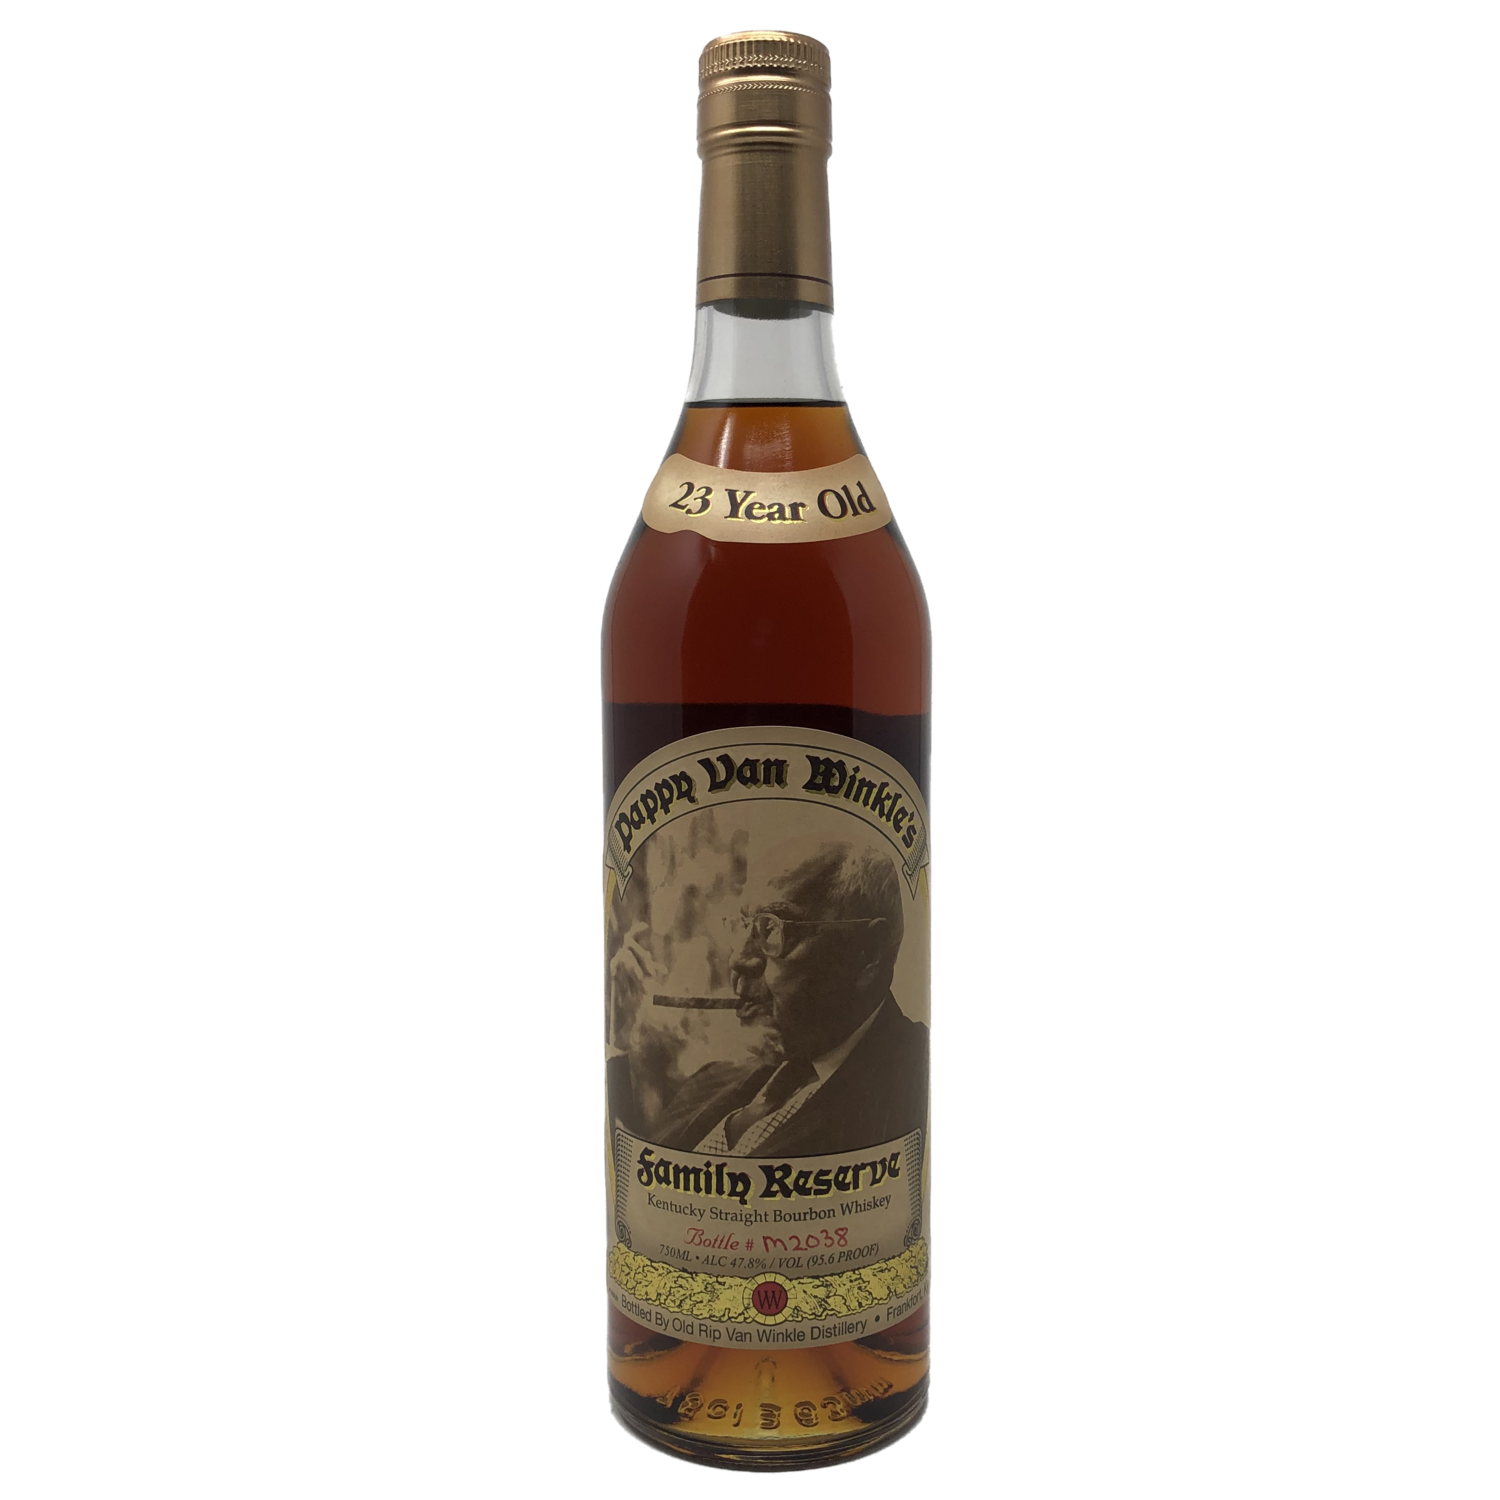 Pappy Van Winkle's Family Reserve 23 Year Old Kentucky Straight Bourbon Whiskey (2021 Release)